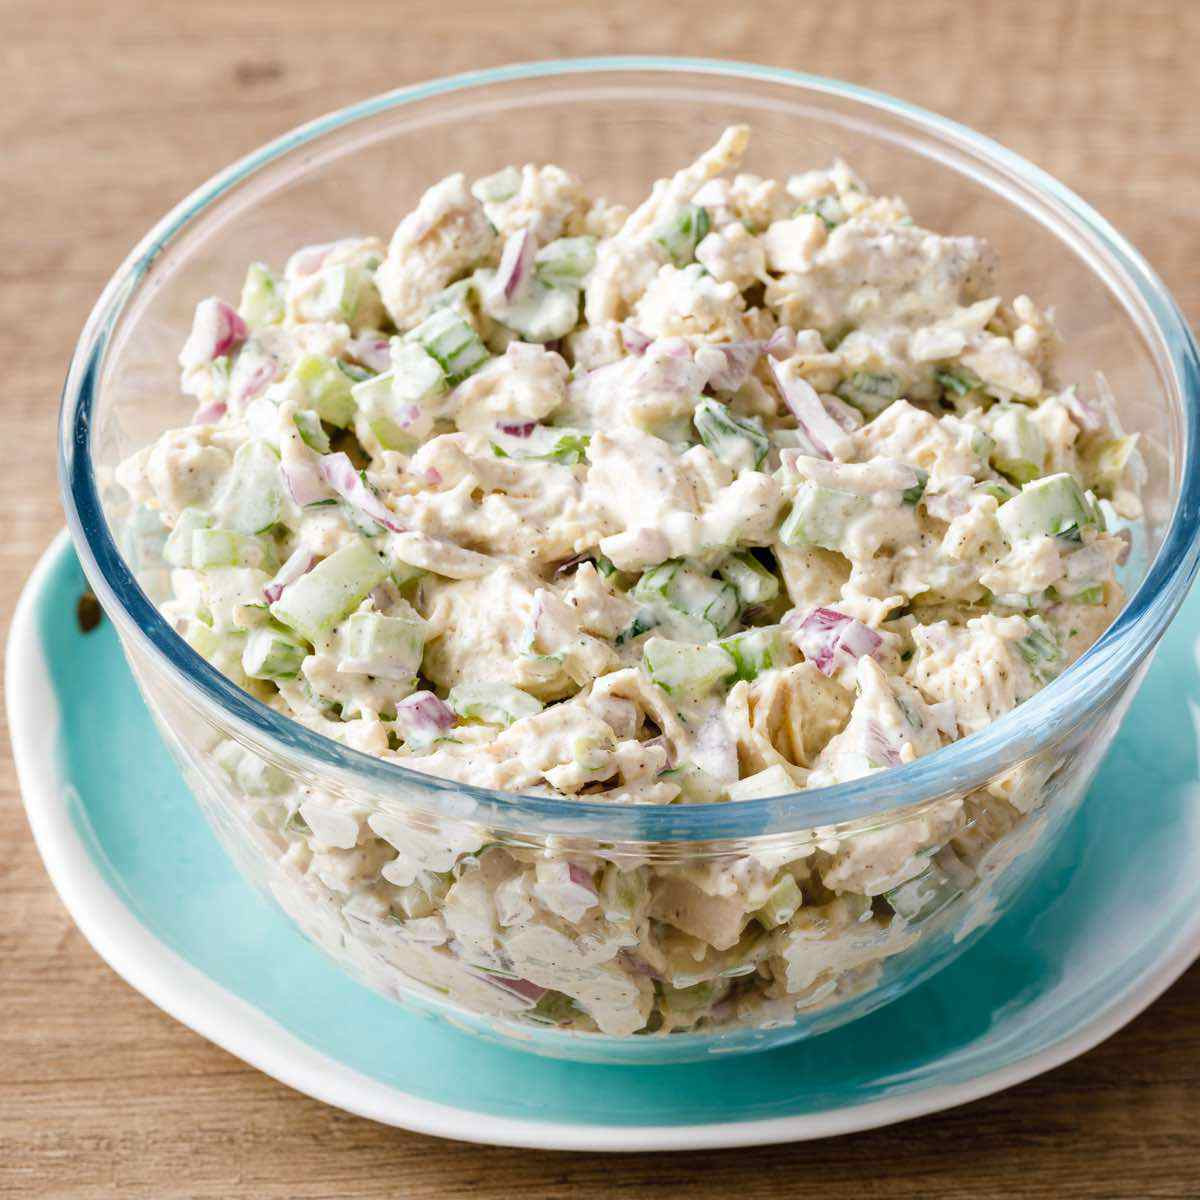 Recipes For Chicken Salad
 Classic Chicken Salad with Homemade Paleo Mayo Holy Yum